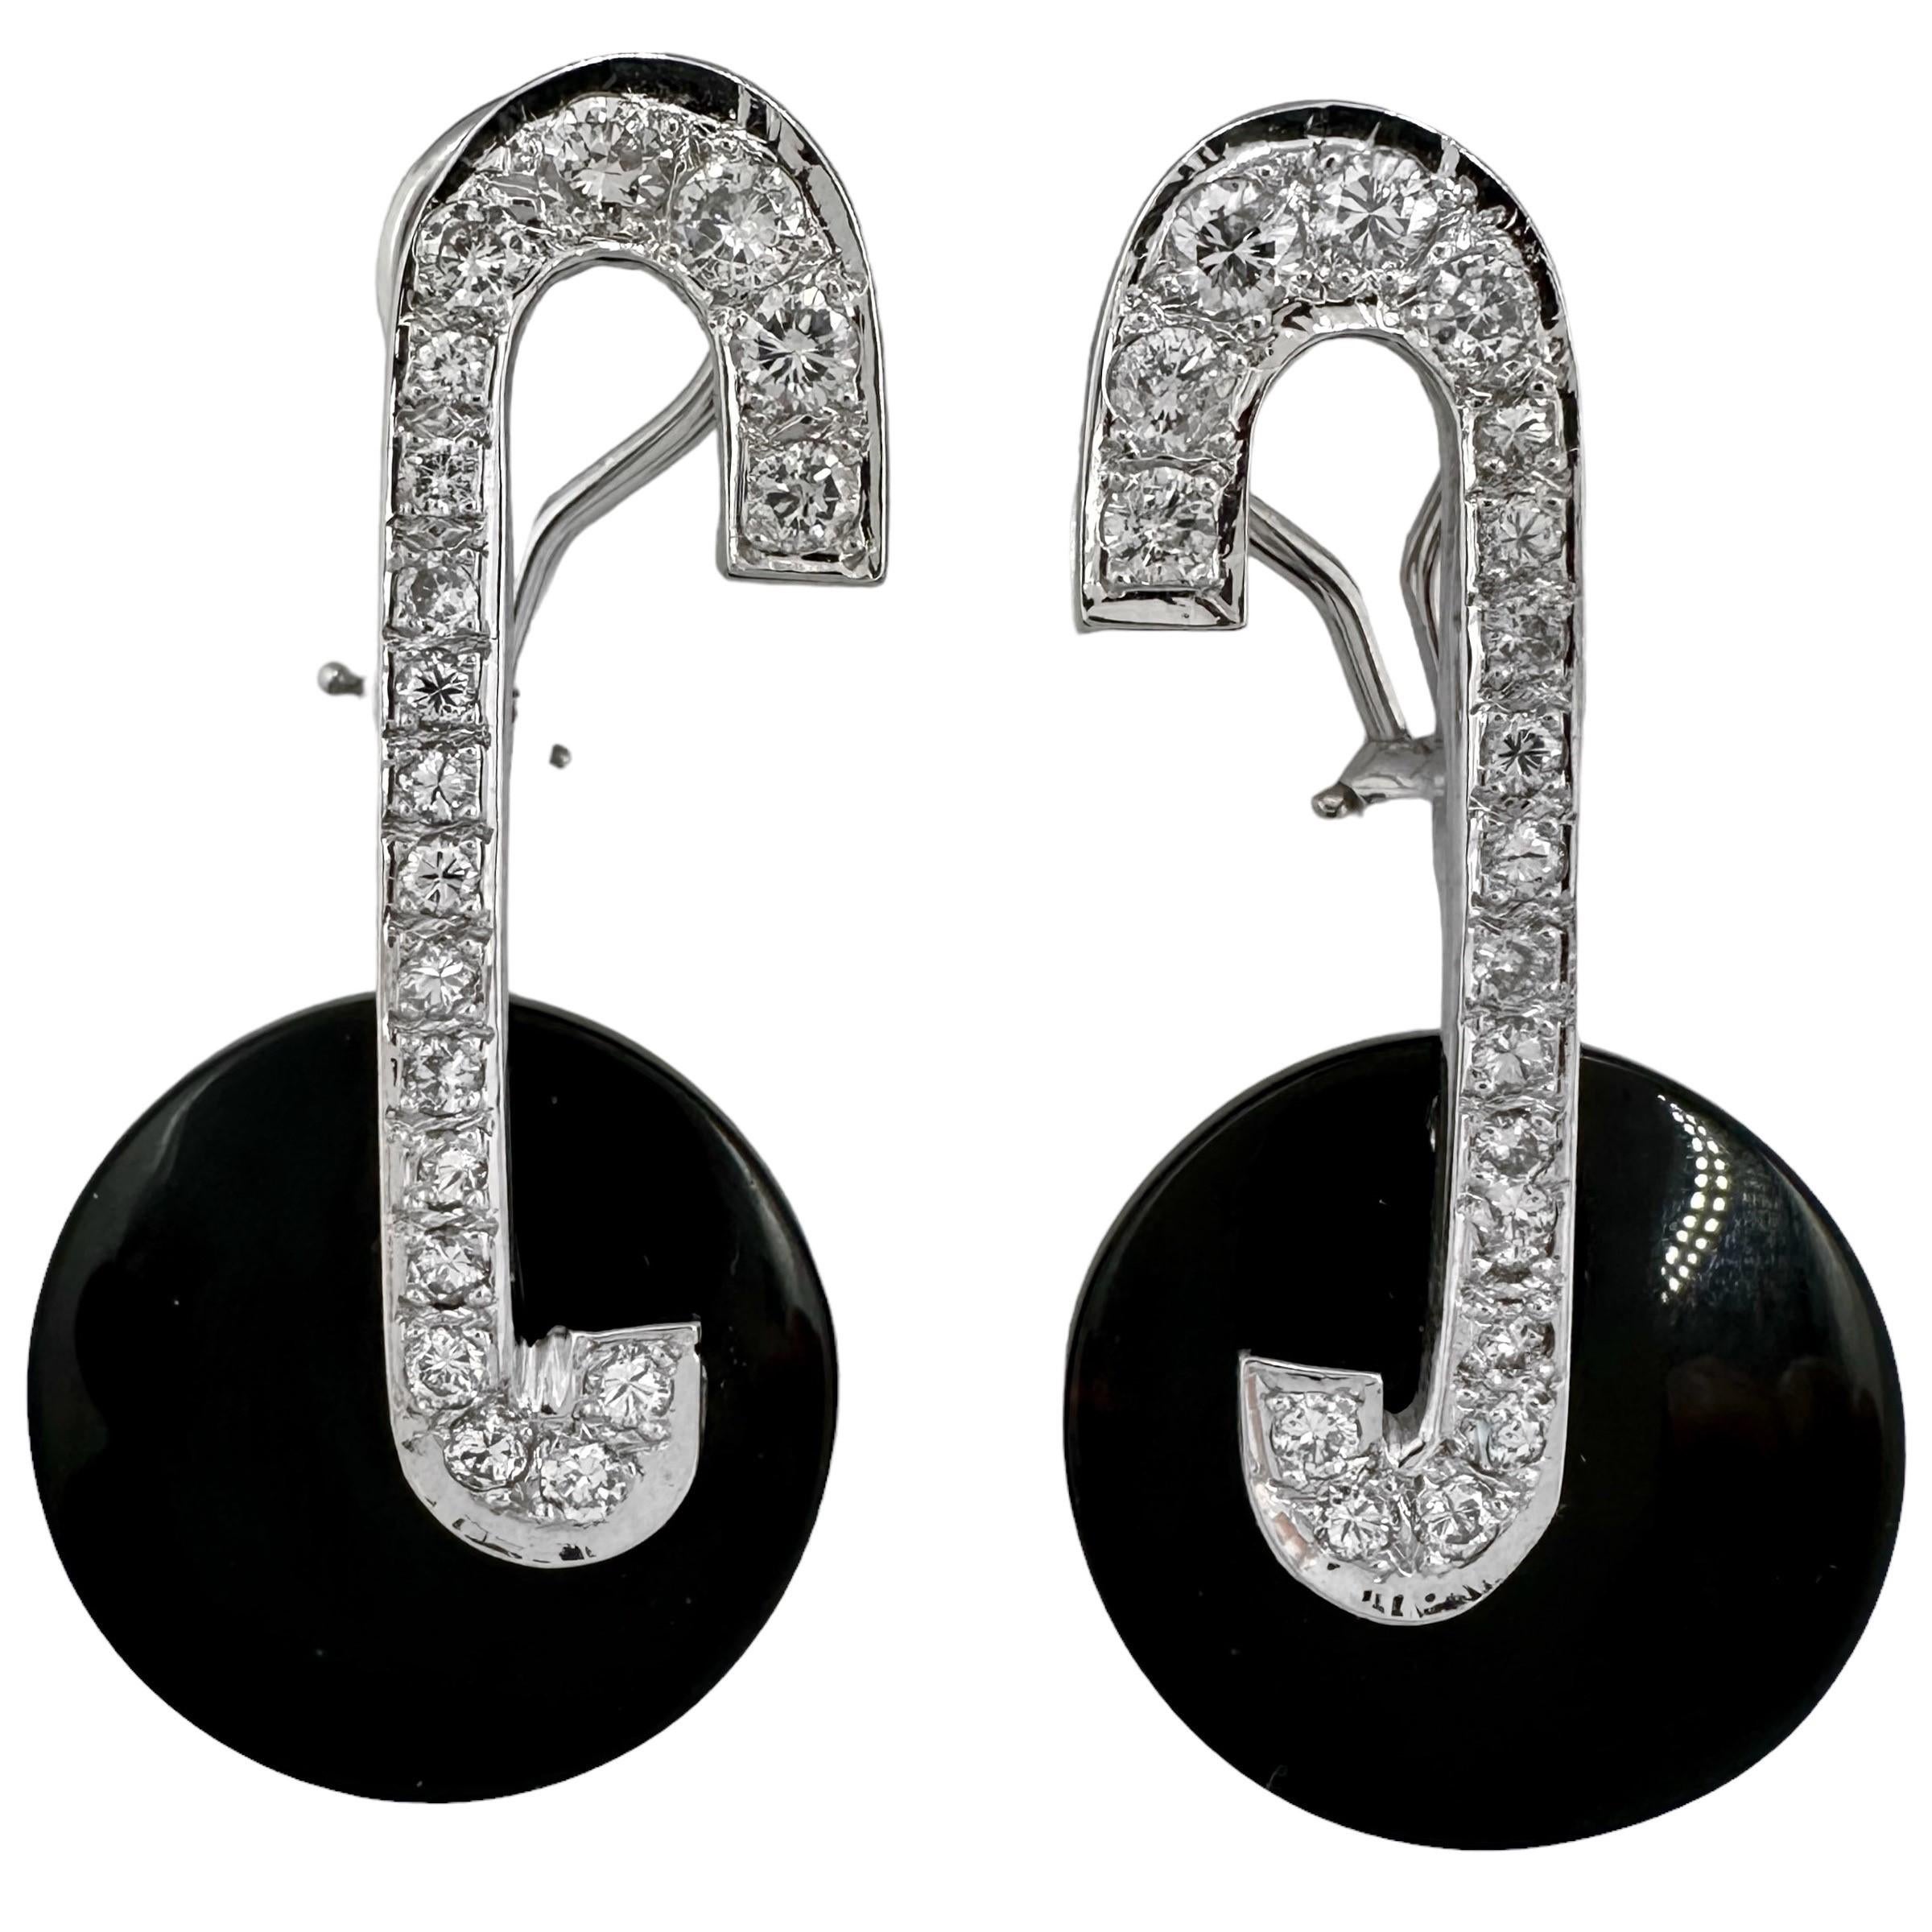 This Modernist pair of 14k white gold fashion earrings are set with a line of brilliant cut diamonds in the form of the letter C, from which 13/16 inch diameter round black onyx discs attach at the bottom. Total approximate diamond weight is 1.25ct